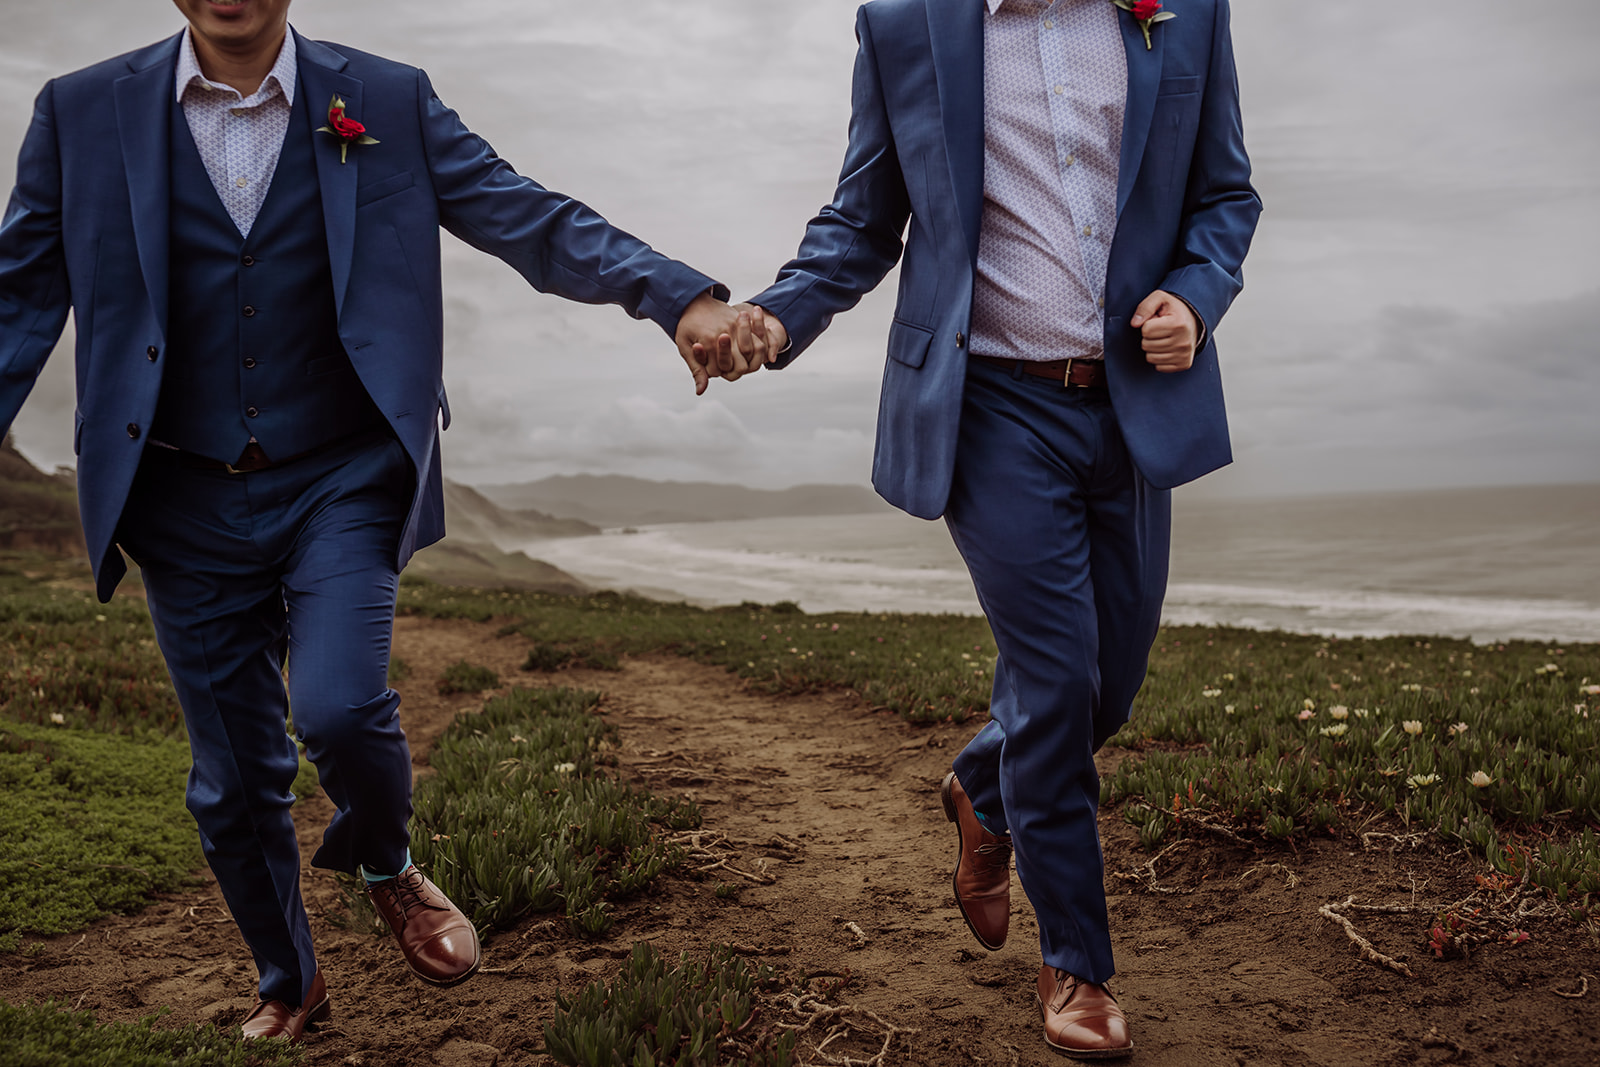 An inclusive intimate wedding and elopement photographer, Xilo Photography, Kati Douglas who is based in Oakland, California in the bay area, took this picture of a same sex gay couple on their wedding day/elopement day as the two grooms lean in near the beach with waves crashing in the background at Fort Funston, CA which was their intimate wedding venue. Ever wondered what is an intimate wedding or what would be considered a small wedding? This is a great example of both!